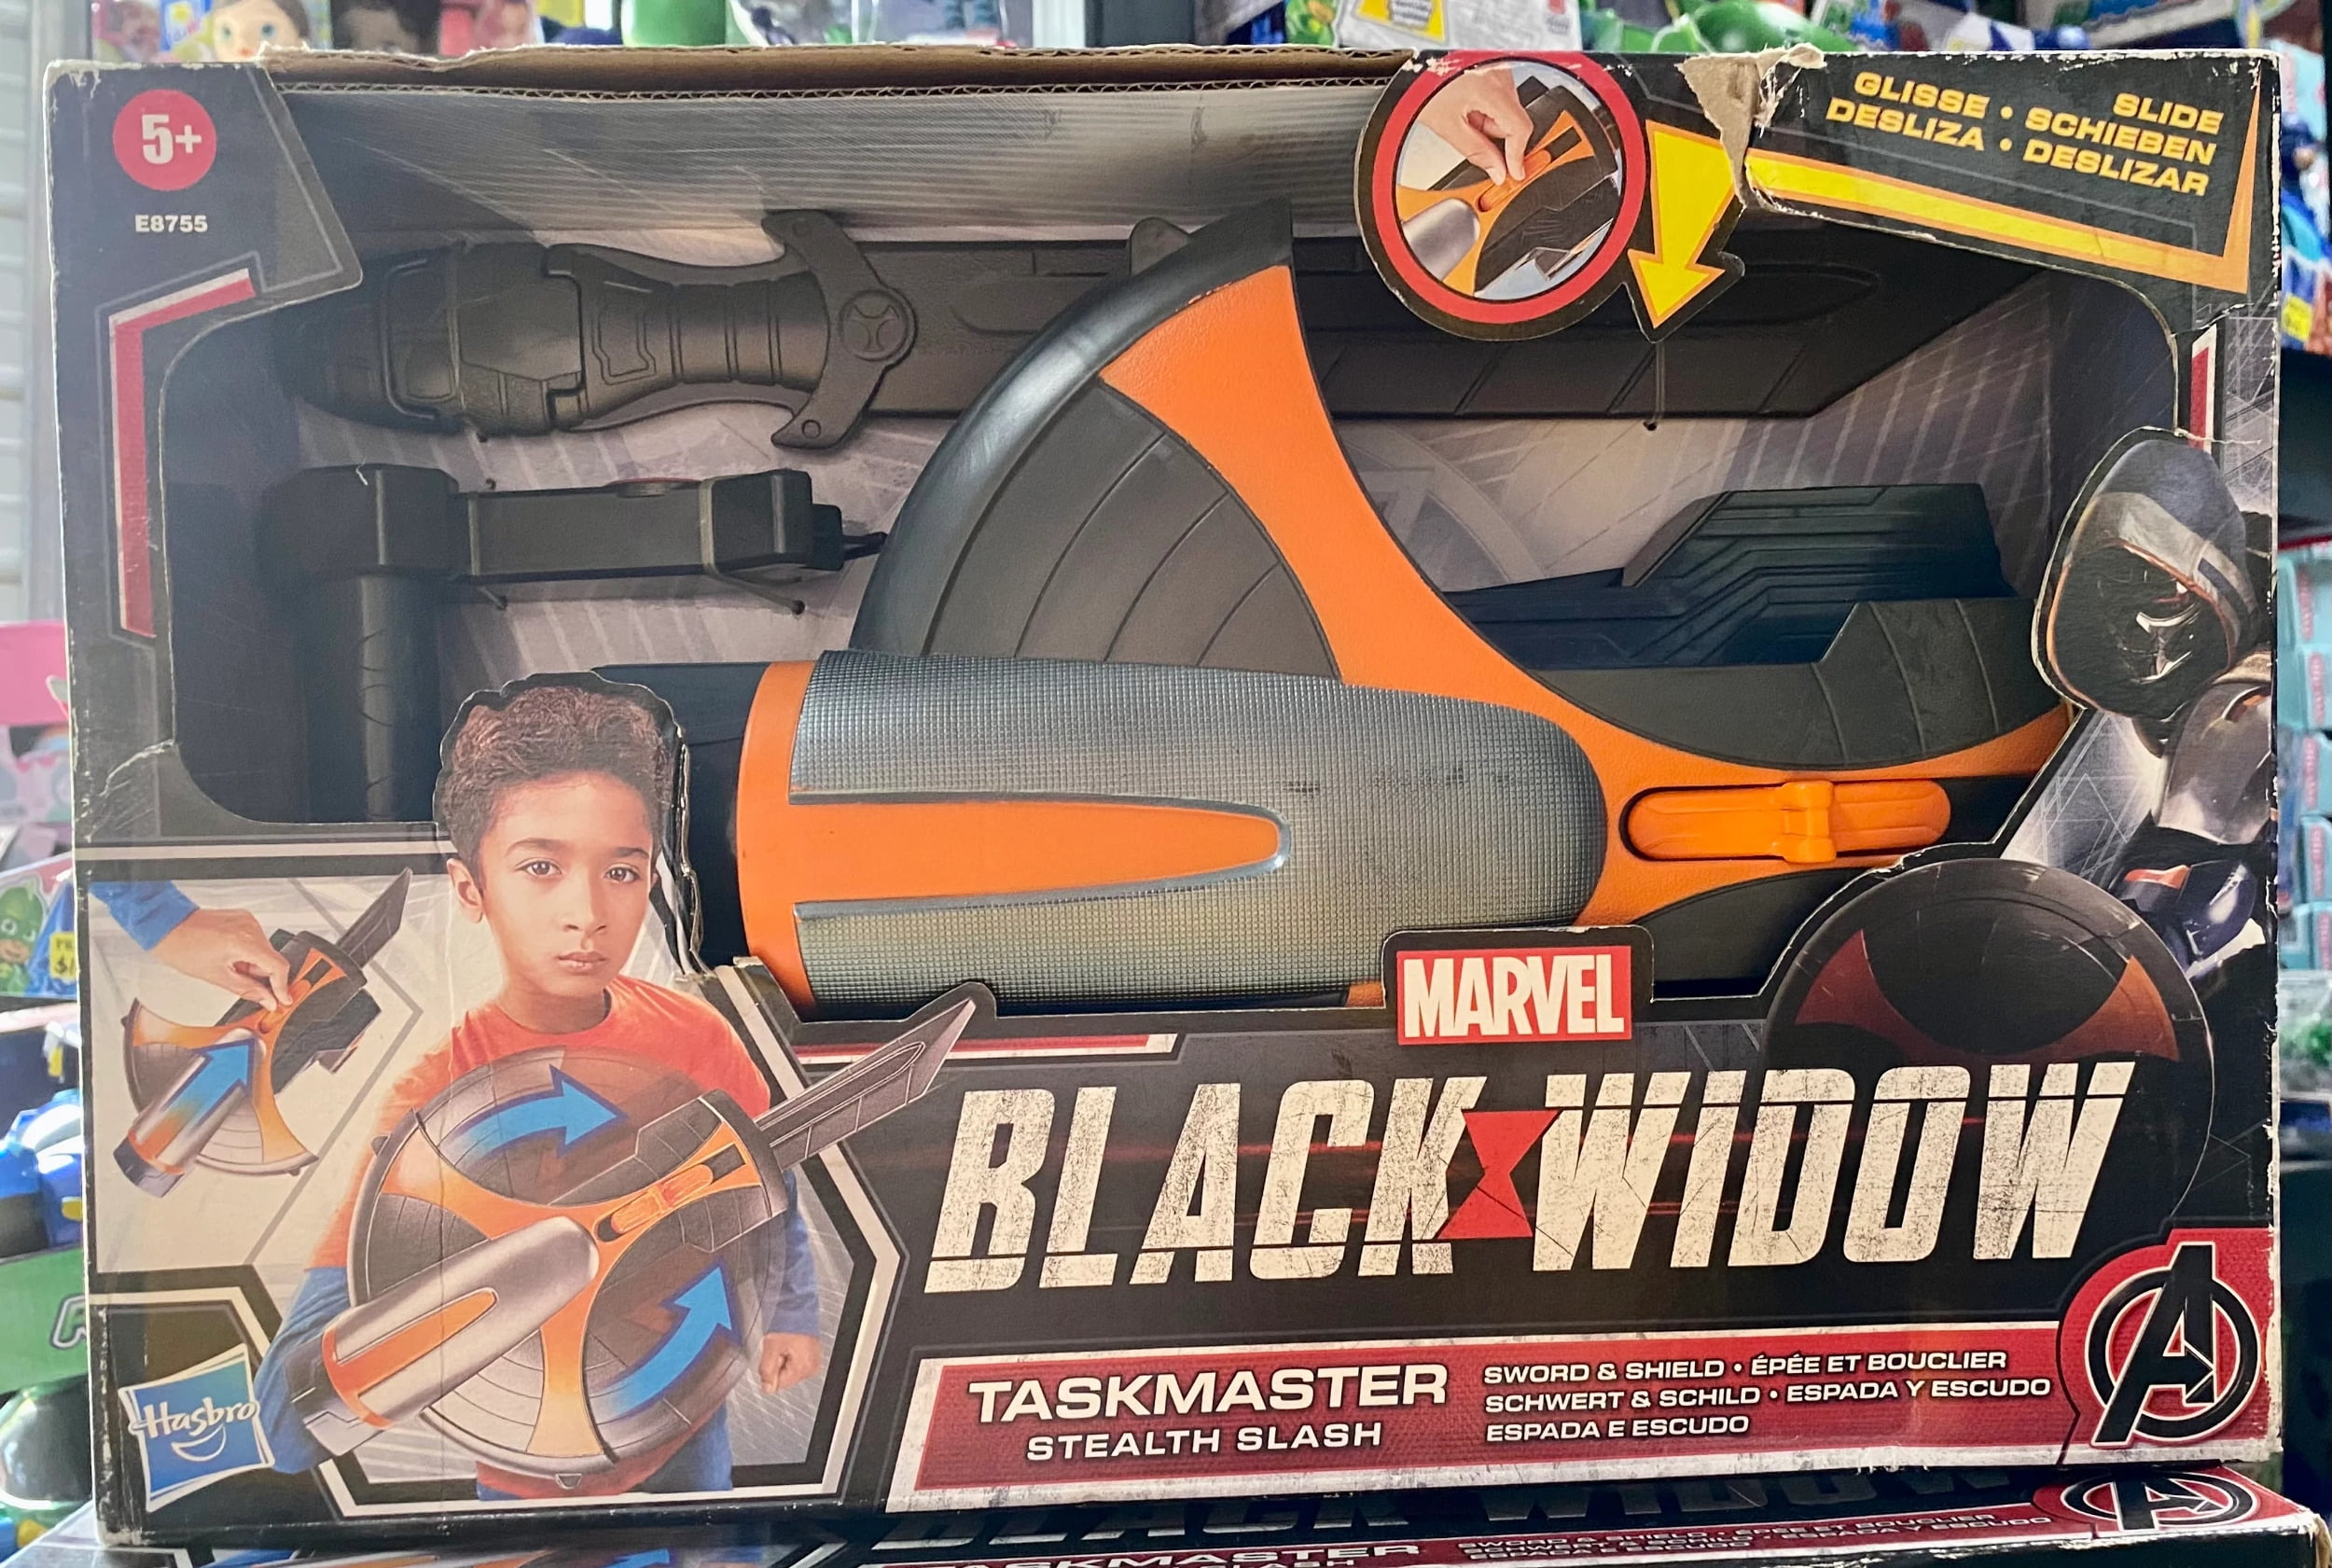 Black Widow Dragon pencil set and exclusive interview